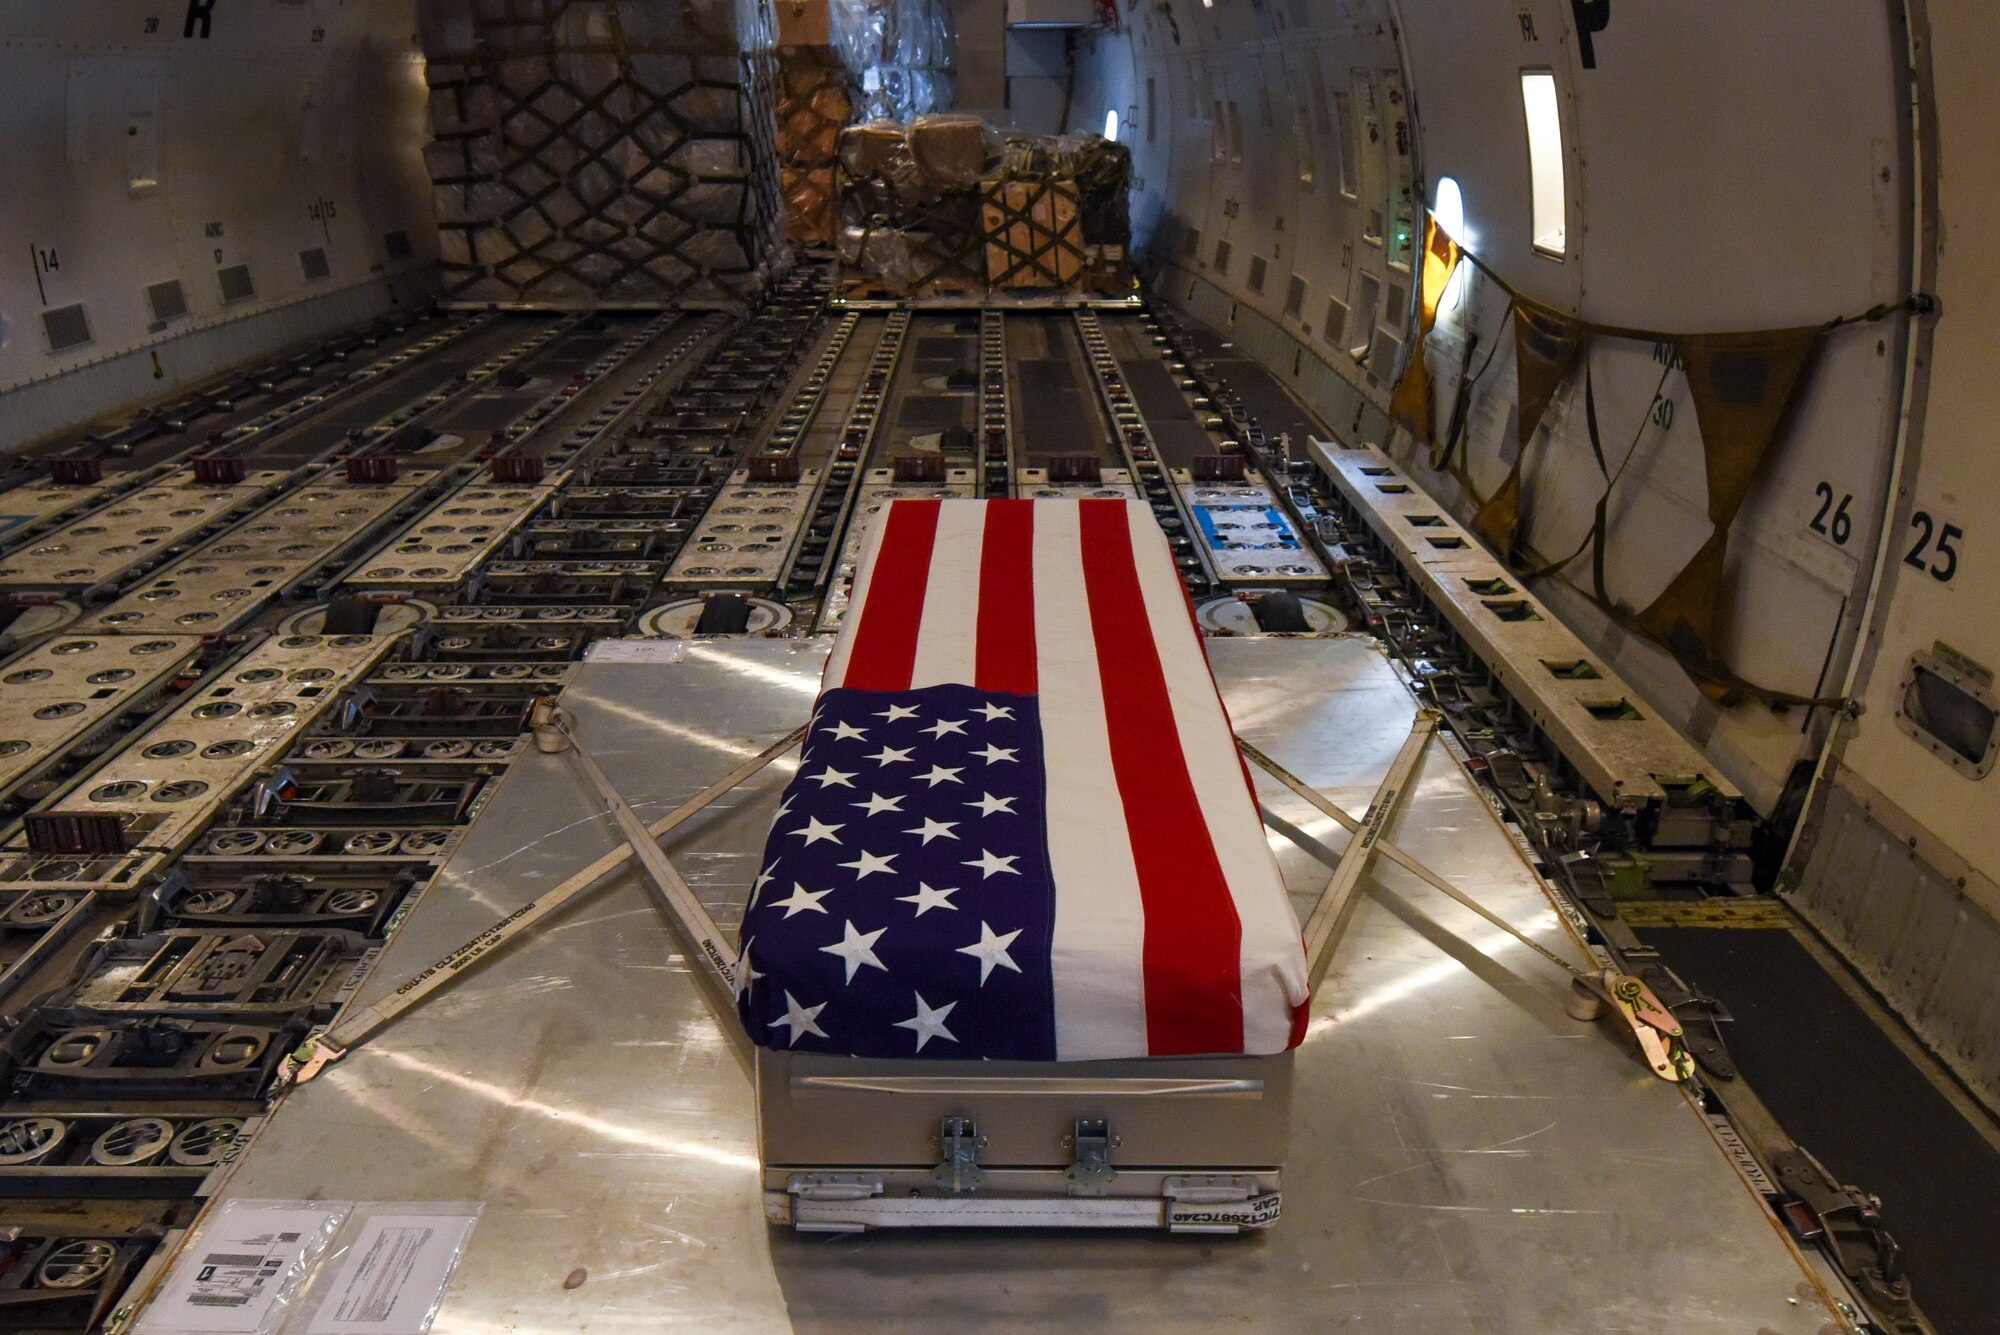 An American Flag is draped over a transfer case on aircraft